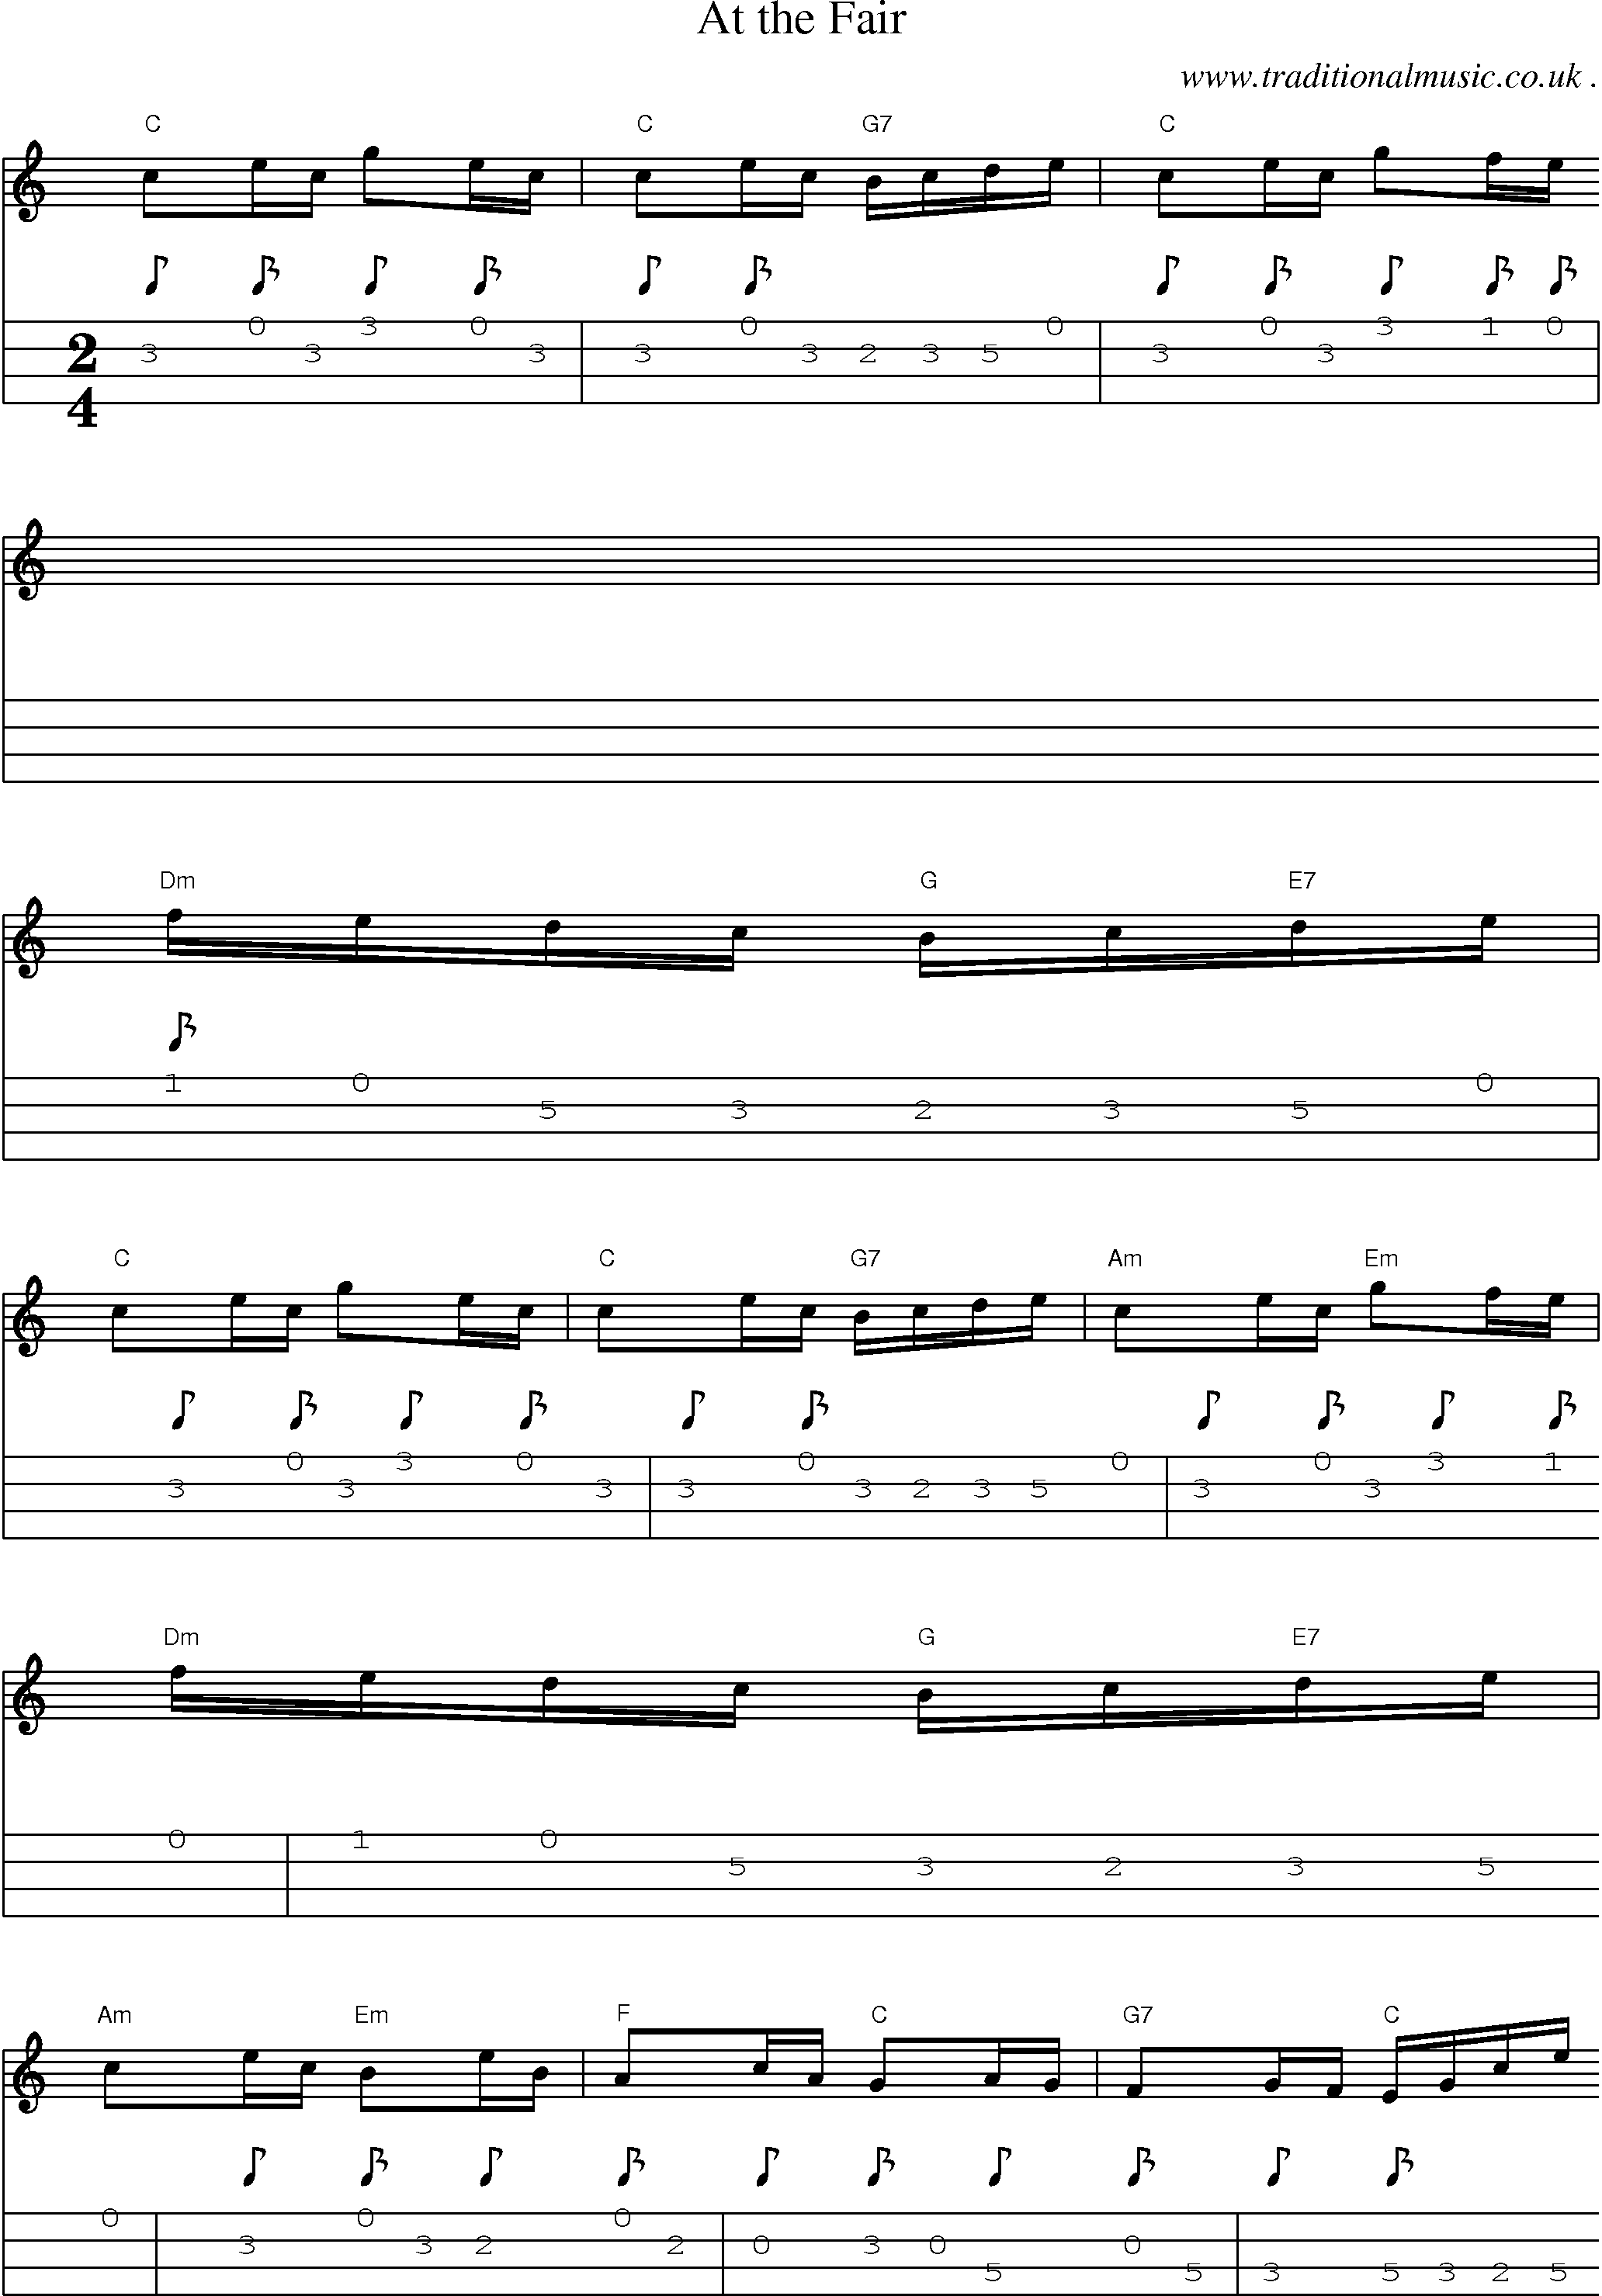 Sheet-music  score, Chords and Mandolin Tabs for At The Fair